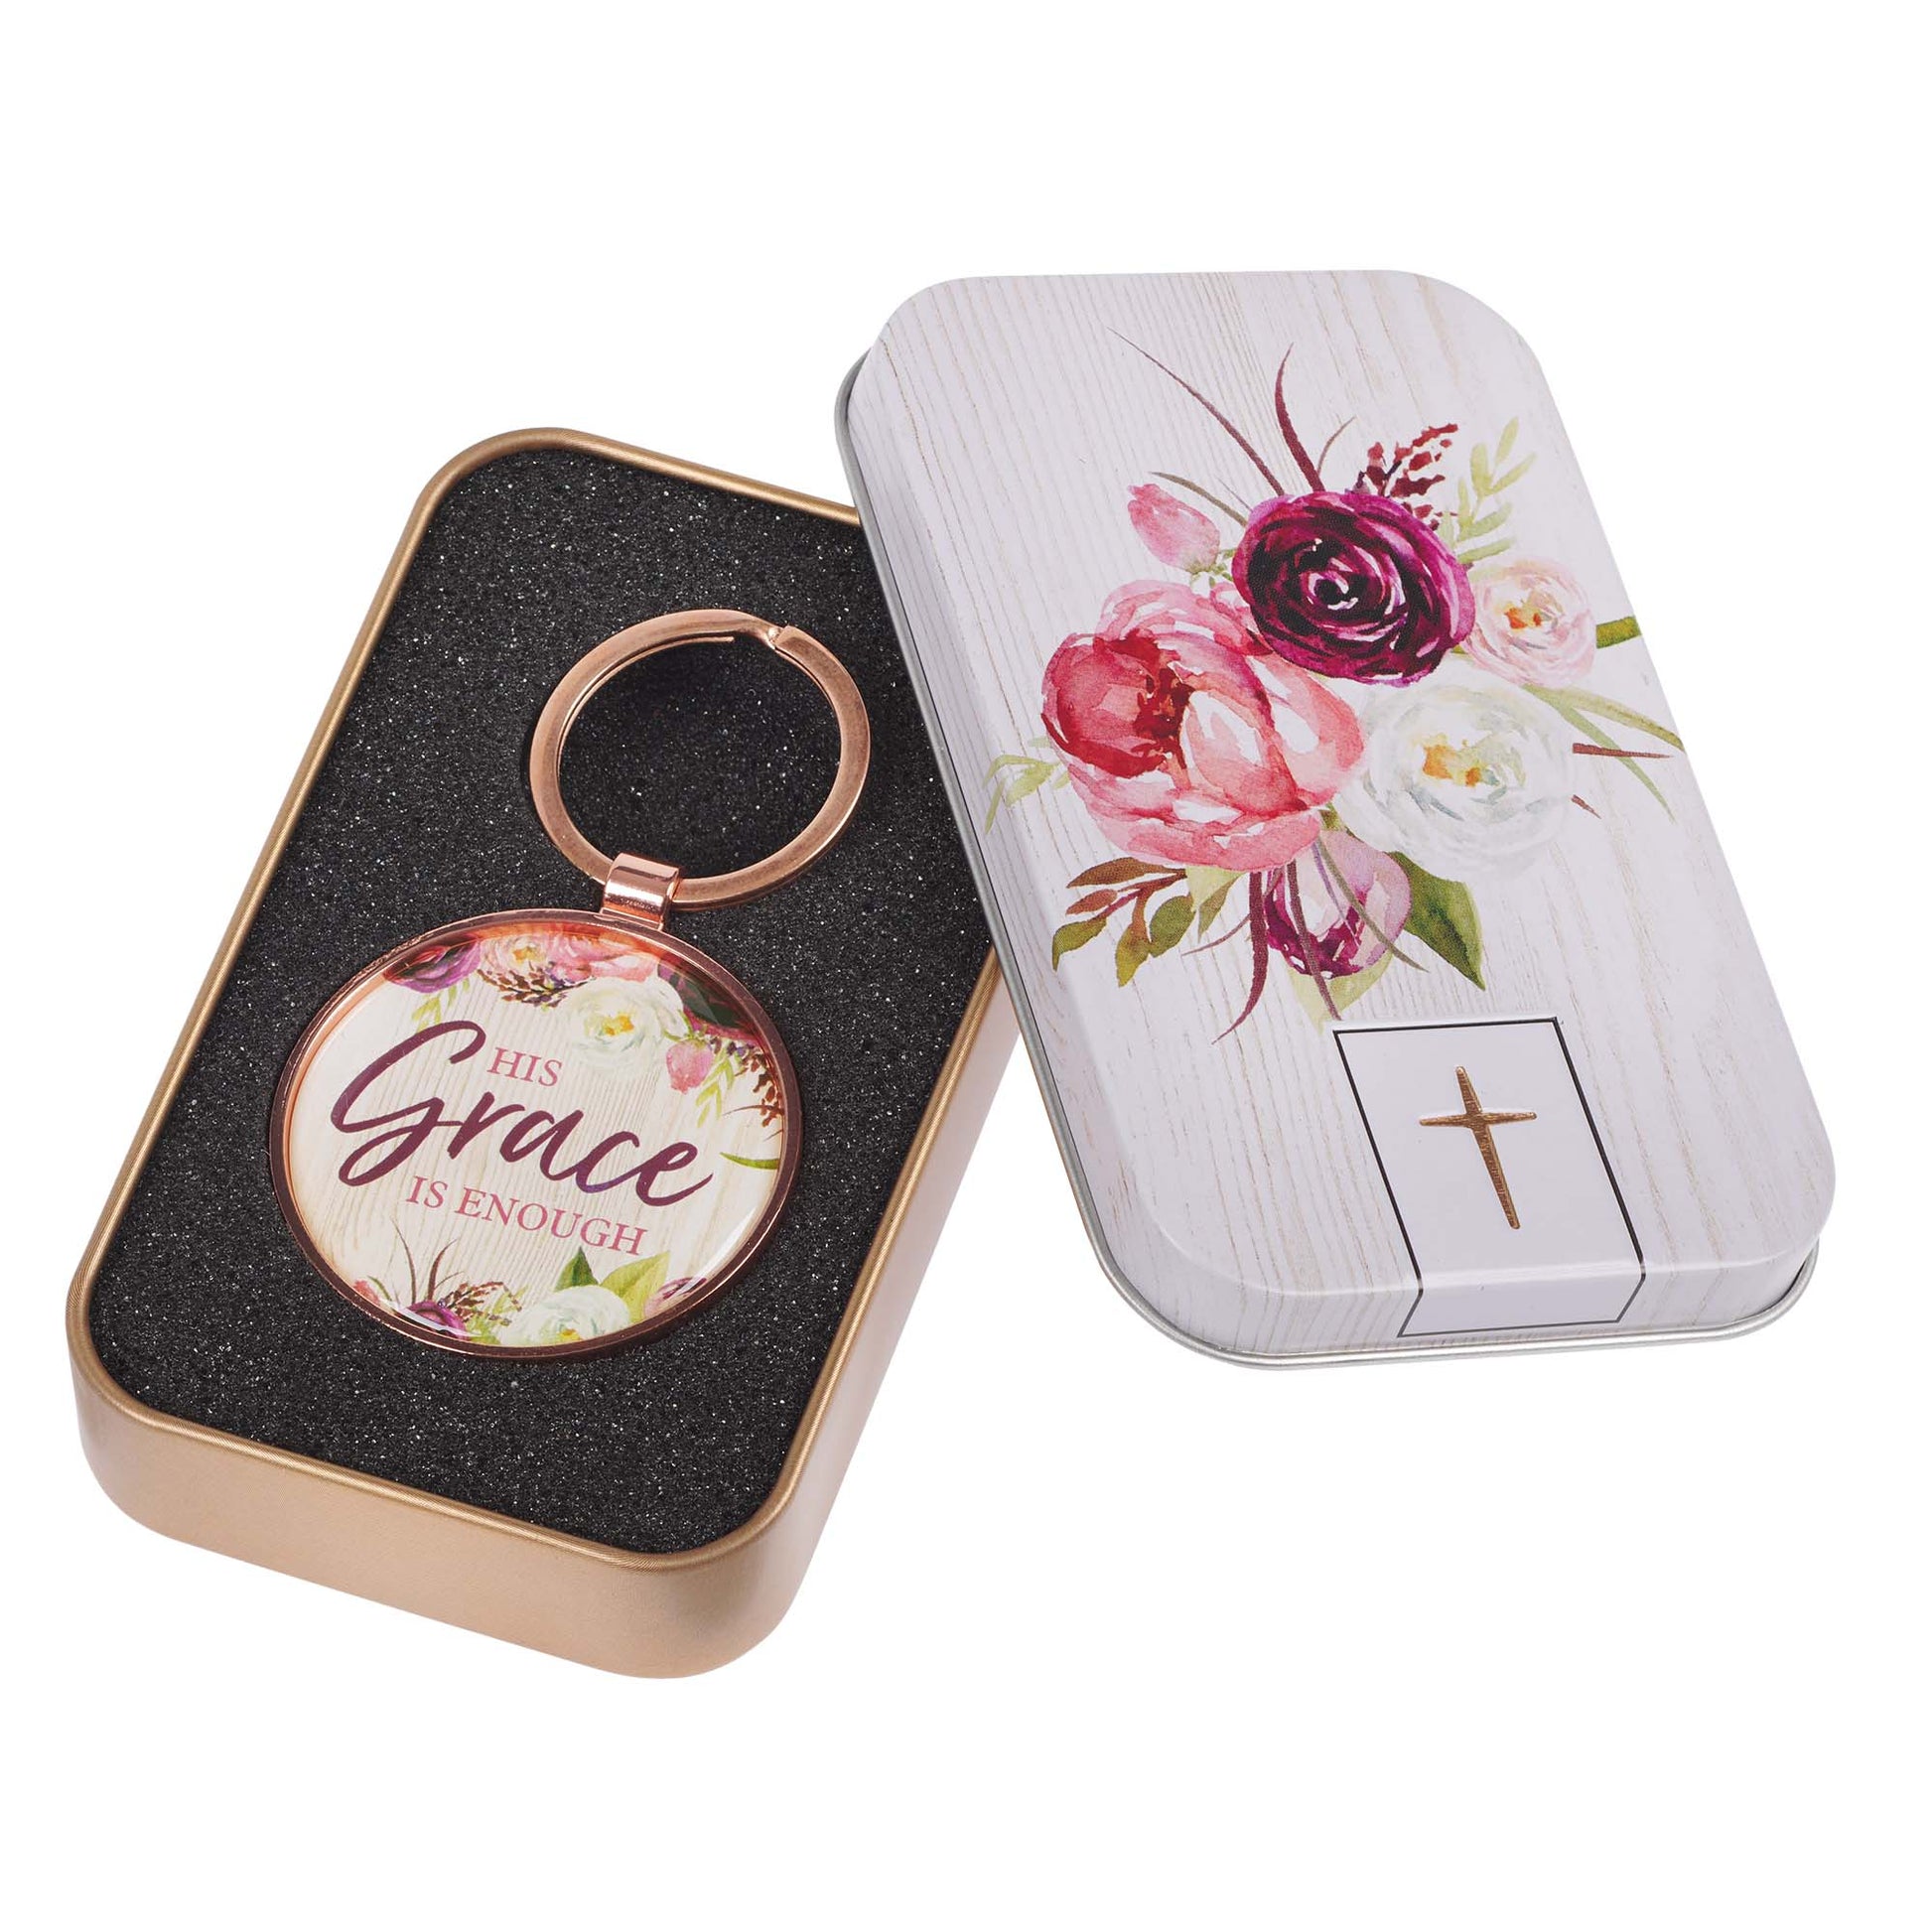 His Grace is Enough Pink Plum Key Ring in a Tin - 2 Corinthians 12:9 - The Christian Gift Company